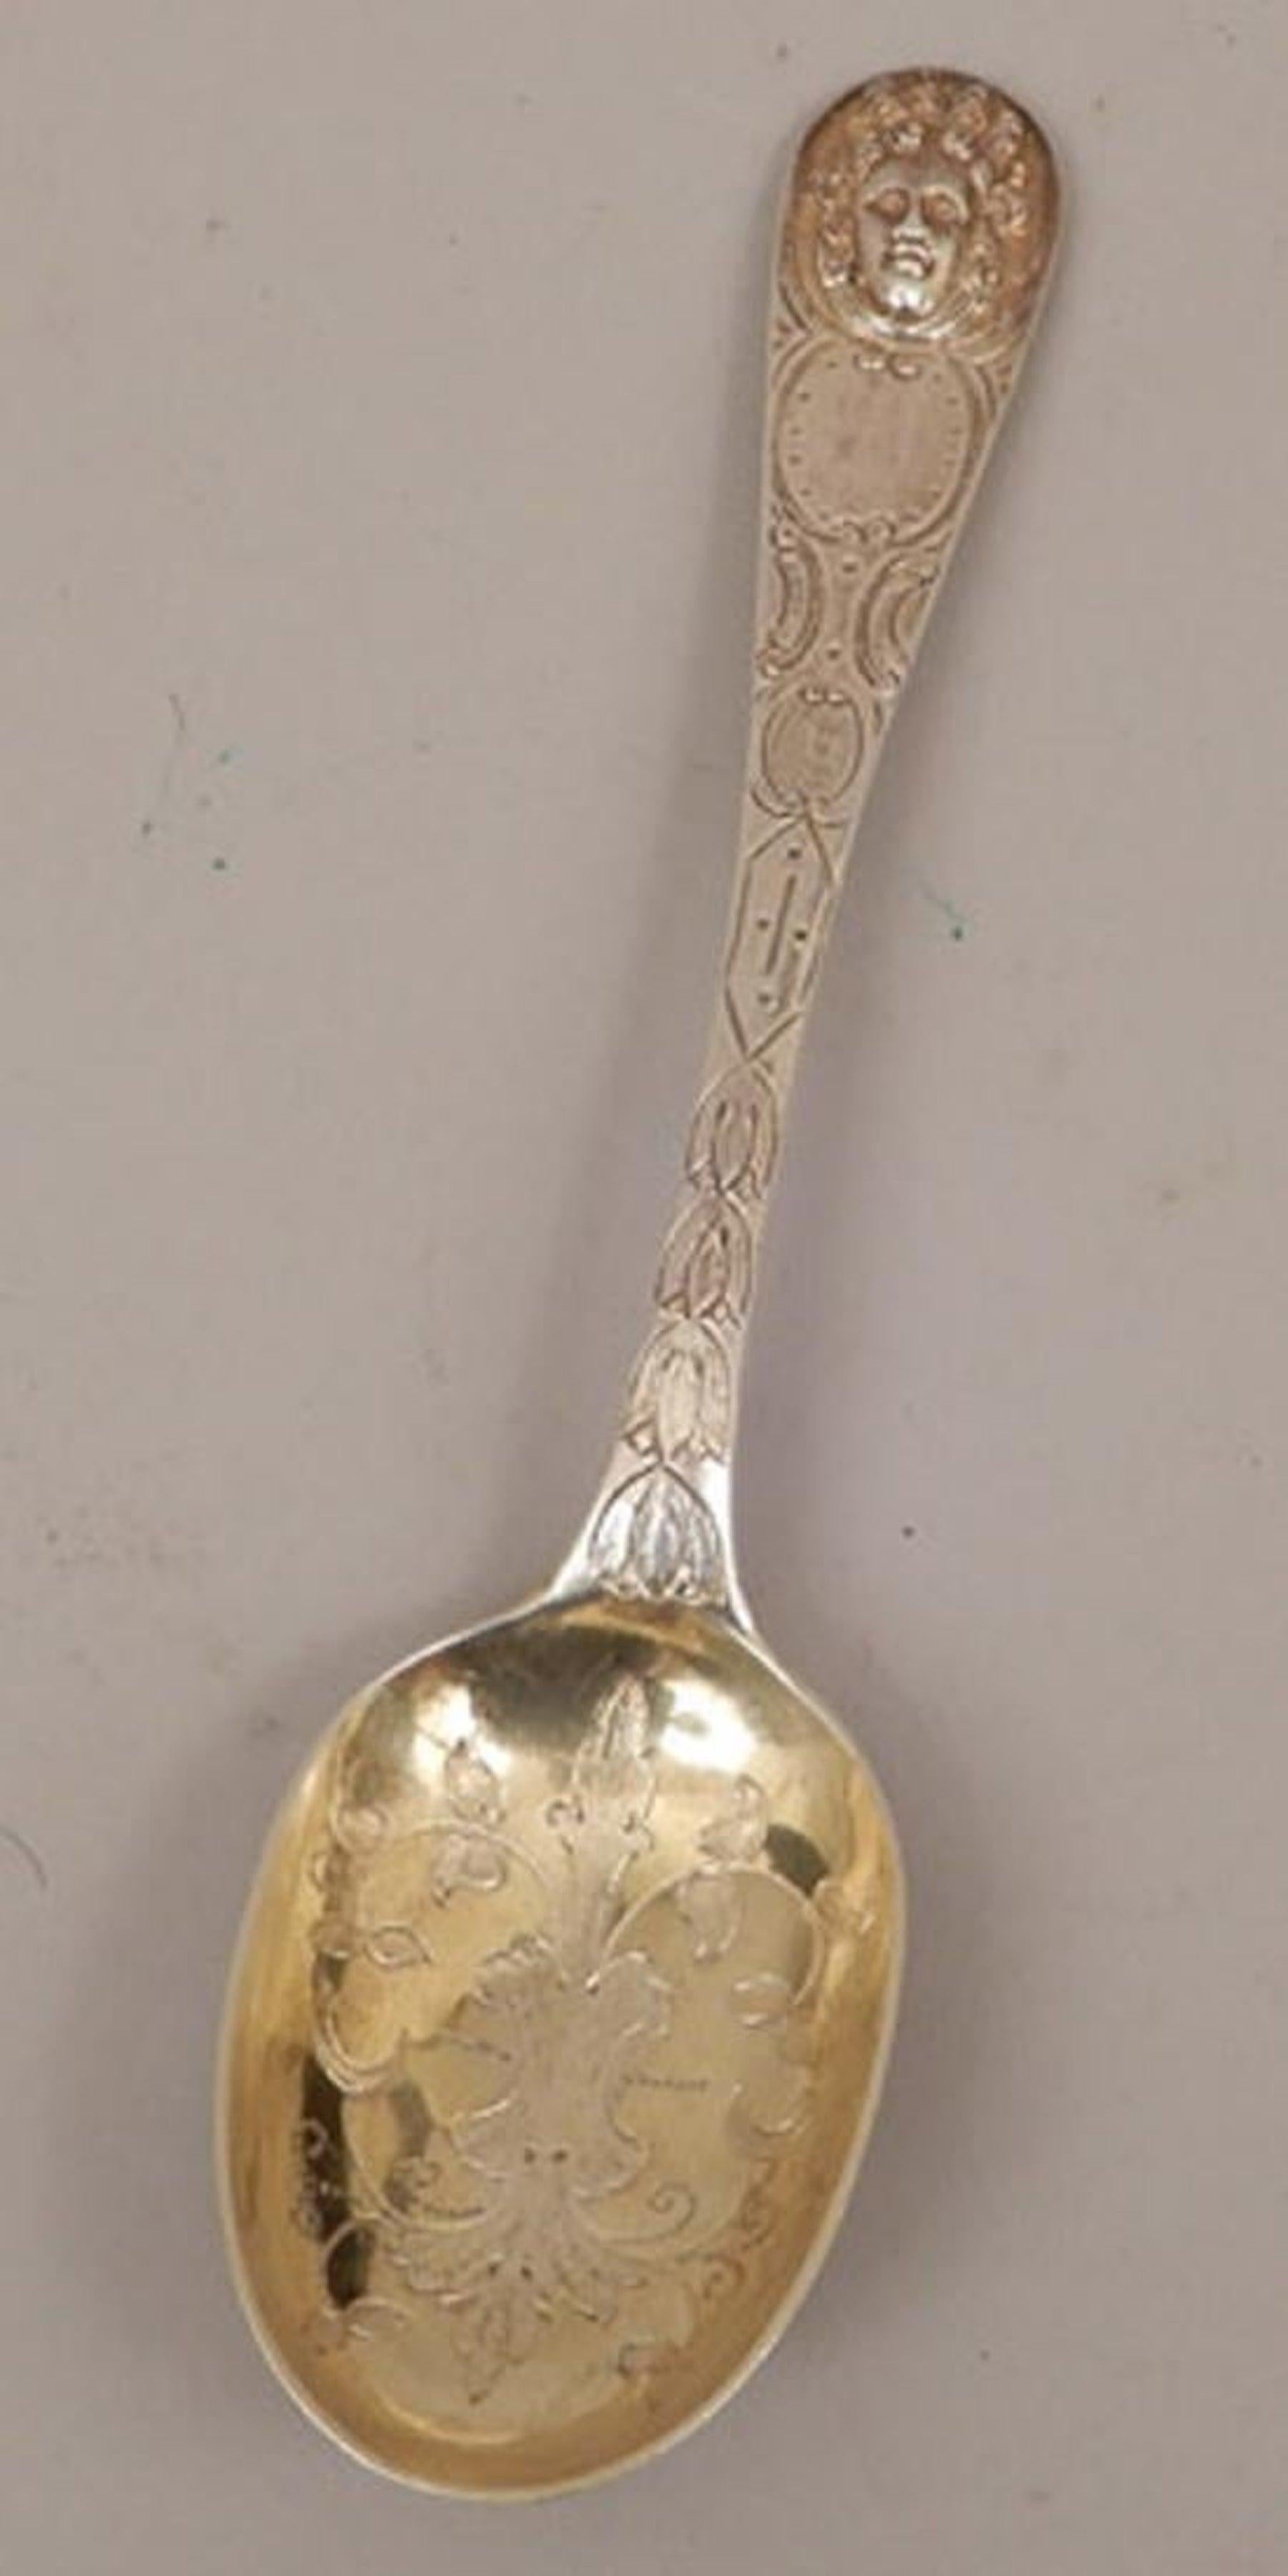 Period Louis XVI Sterling table spoon, Paris, 1789
A tour de force of the Louis XVI style with applied medallion handle. The oval flat edge gold-washed bowl is engraved with leaf and vine decoration.
Bearing hallmark of crown above P/89, a